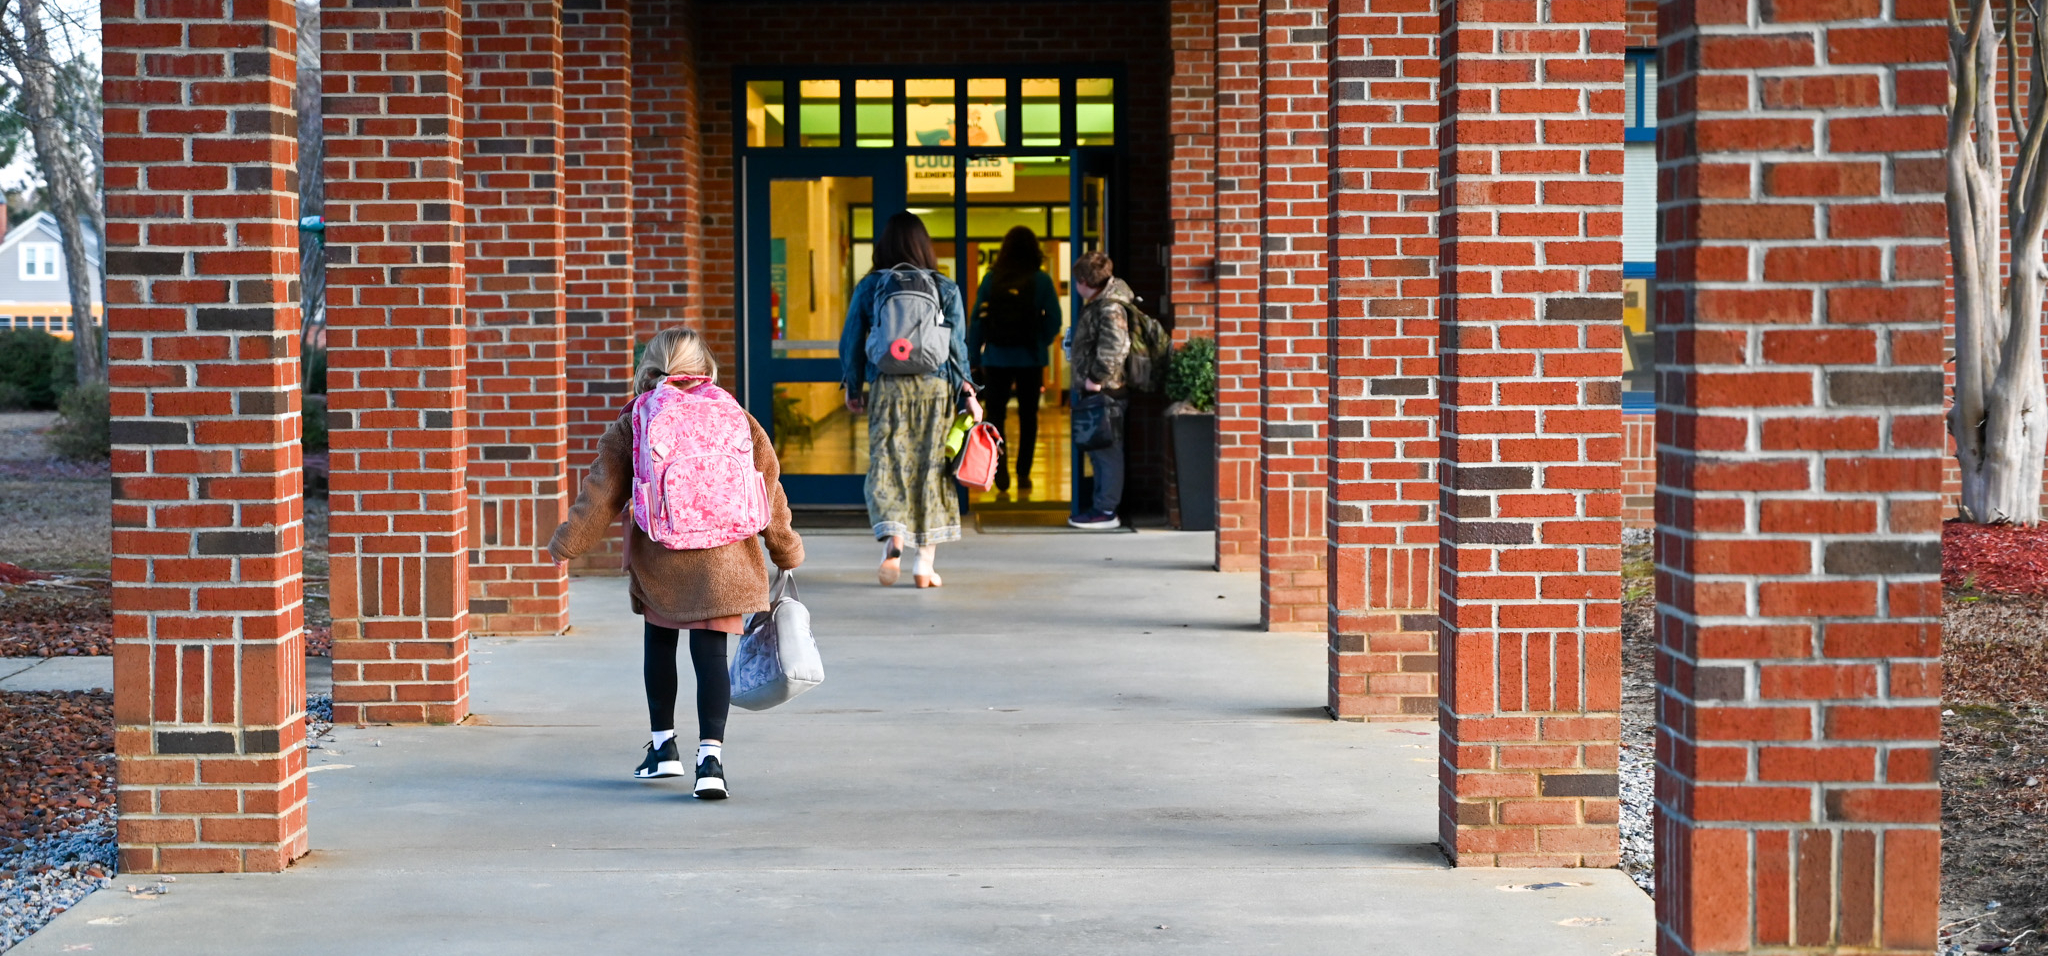 outside of school building with students walking inside